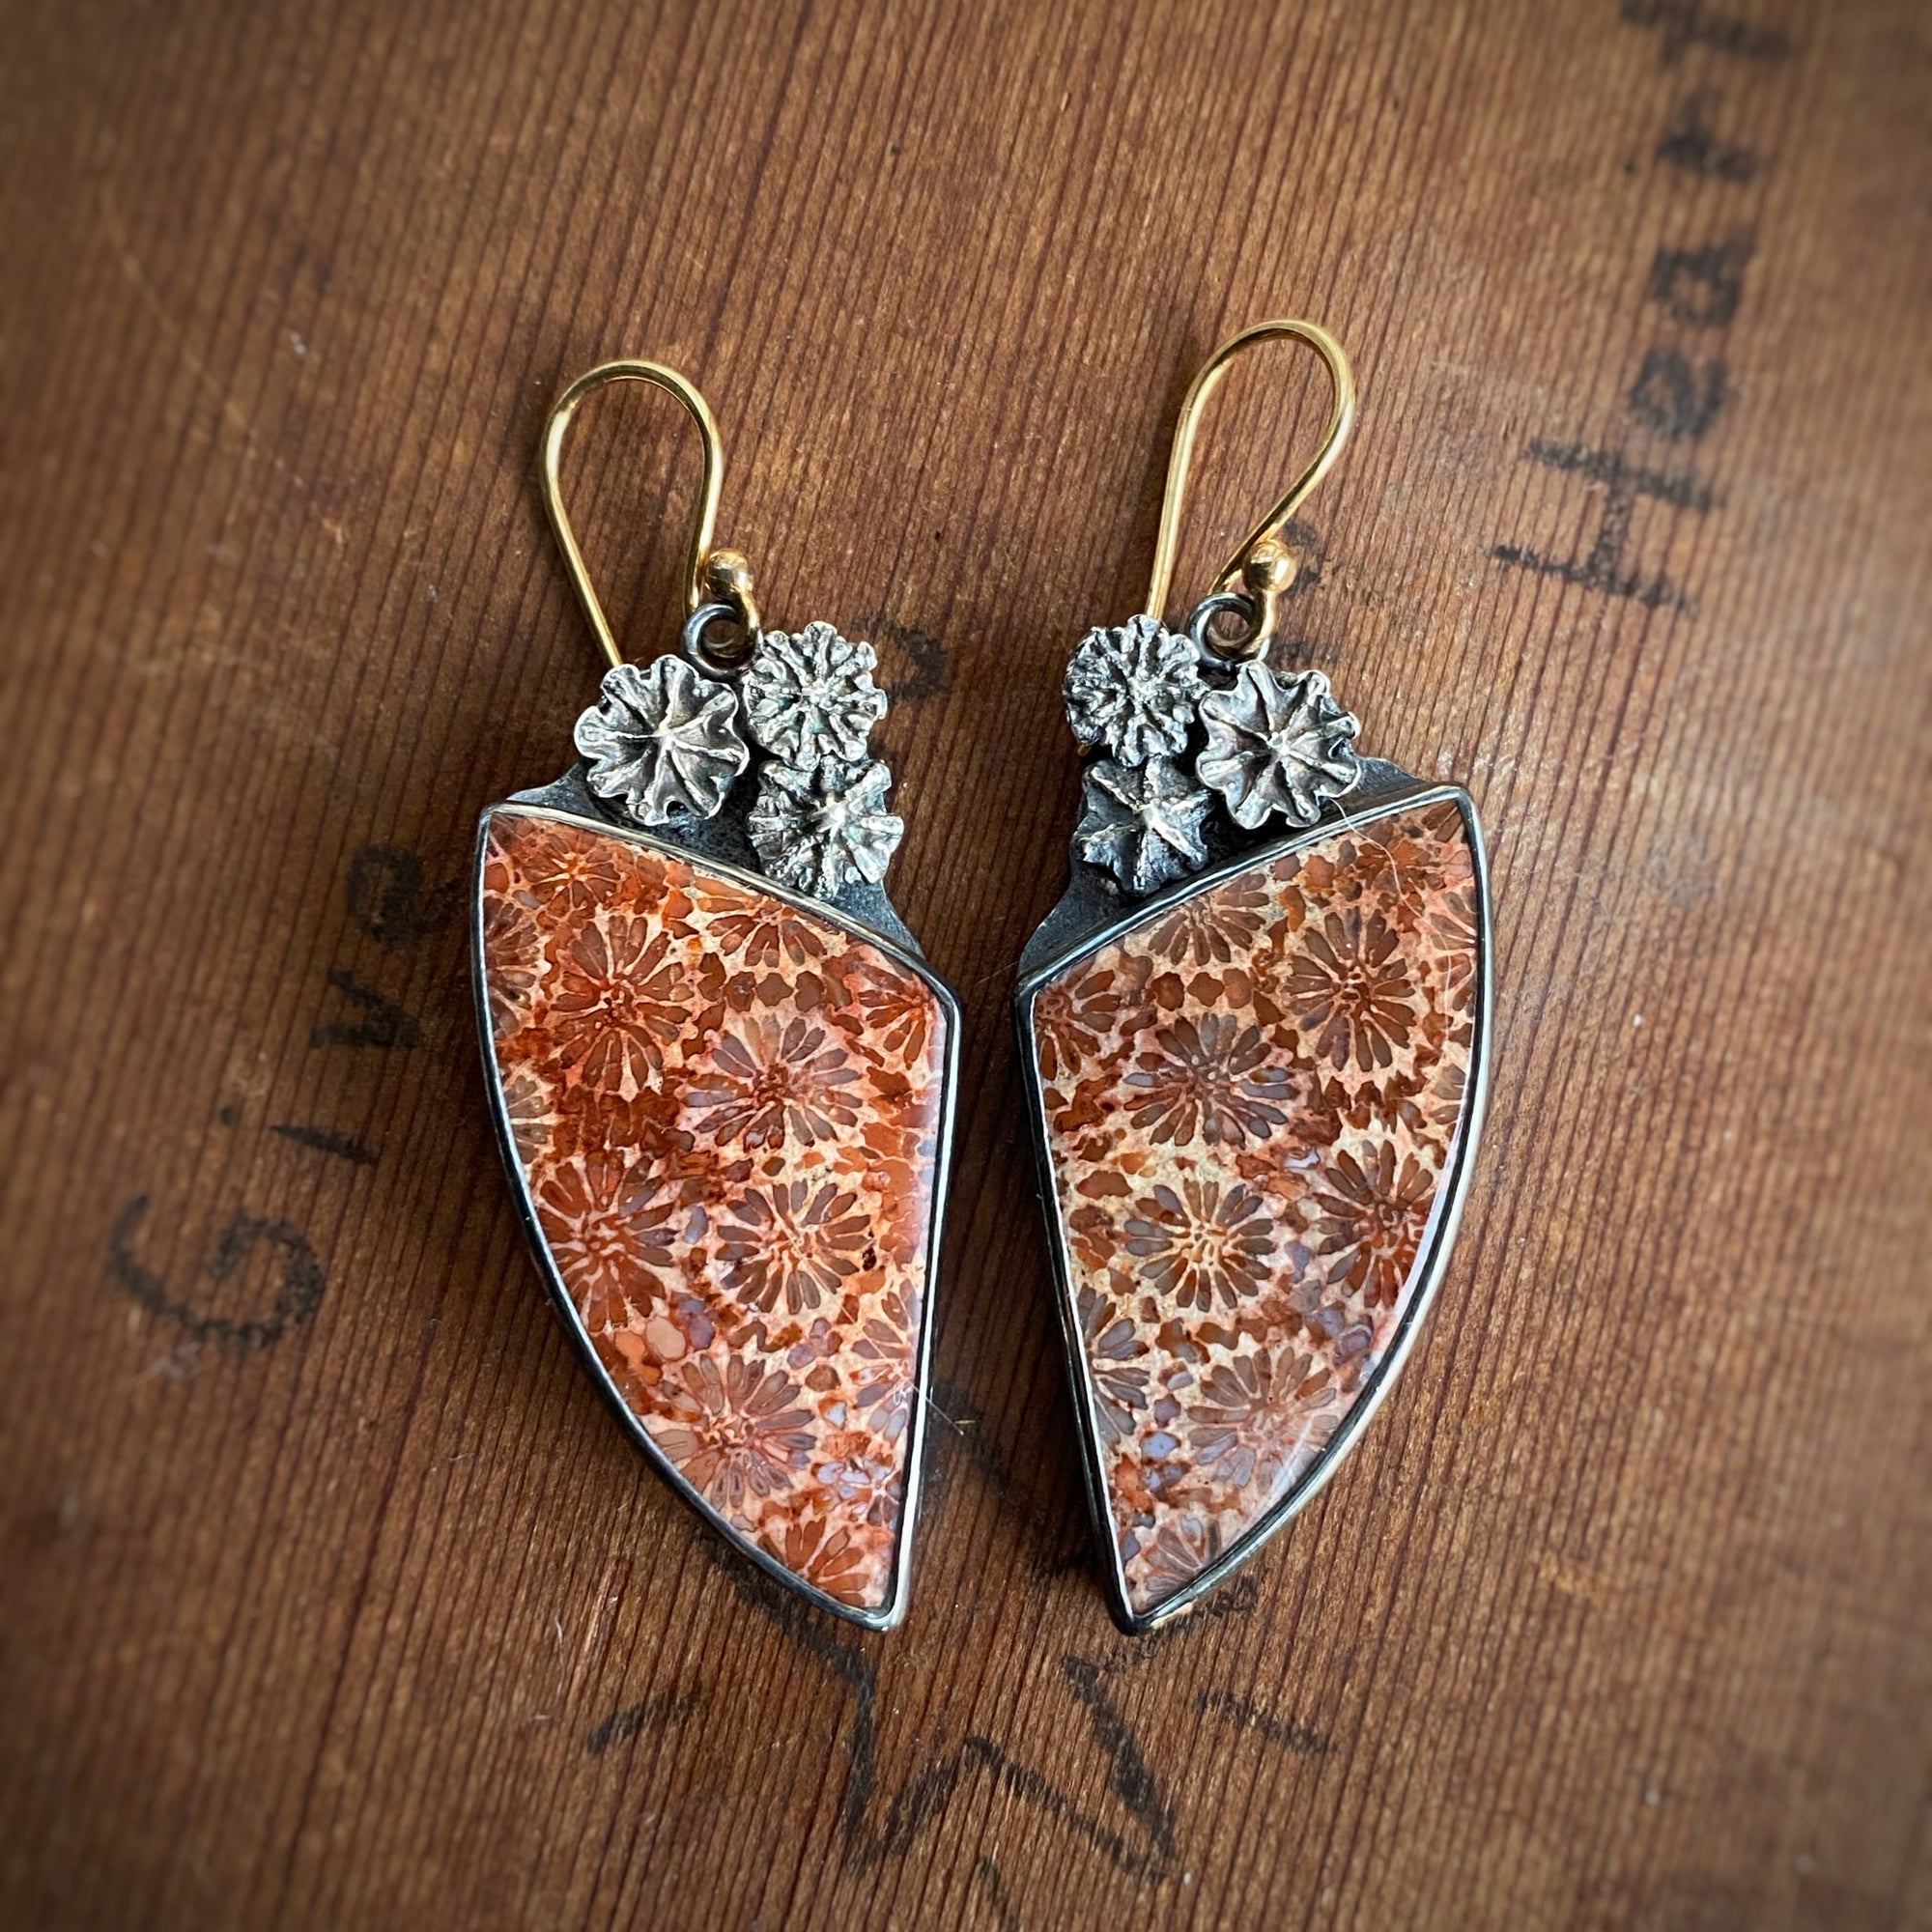 Fossilized Coral Earrings with Poppy Pods